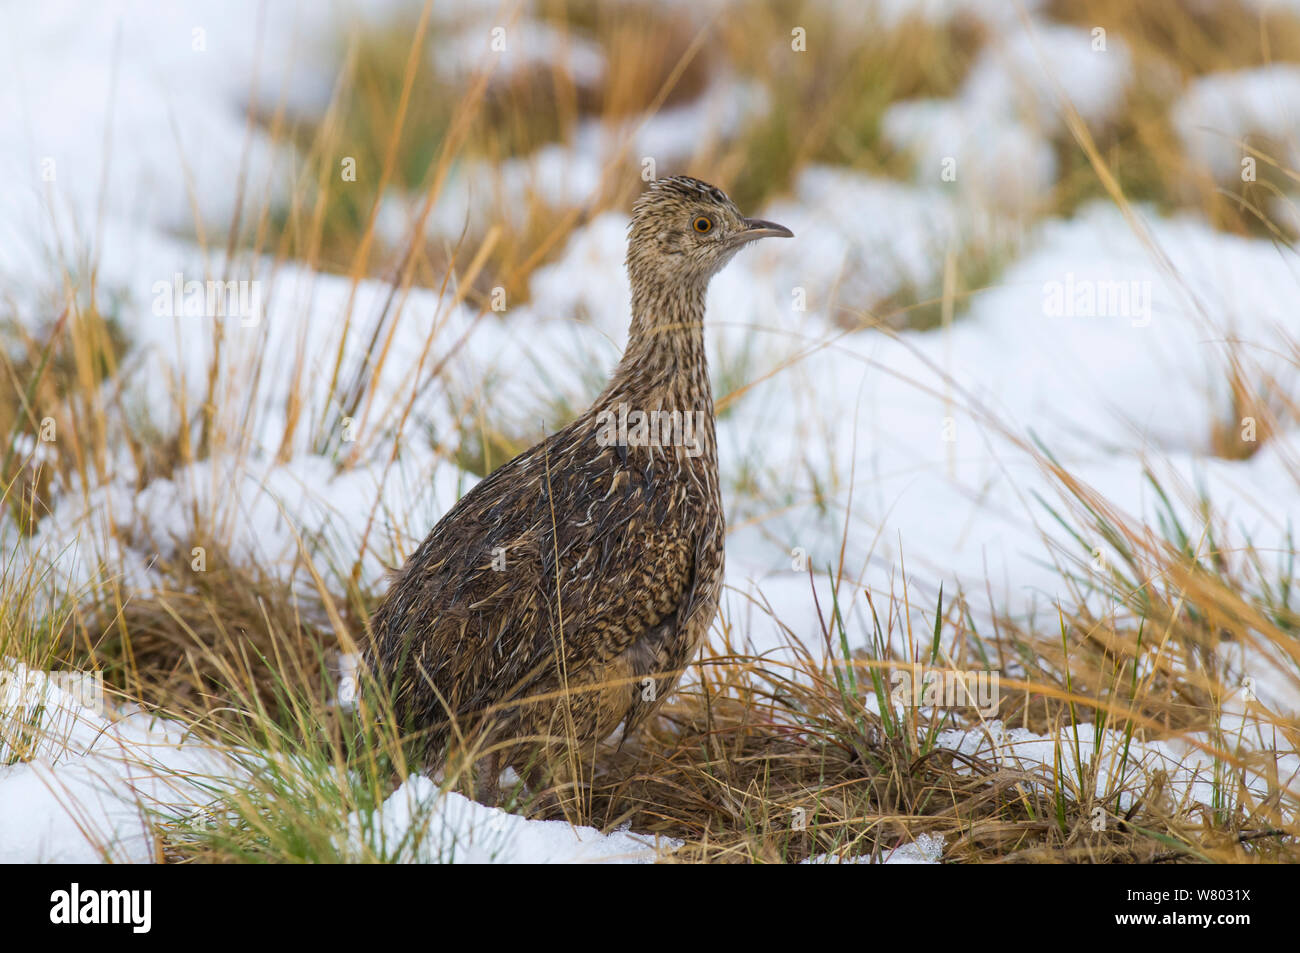 Spotted nothura (Nothura maculosa) in snowy grassland, La Pampa, Argentina Stock Photo